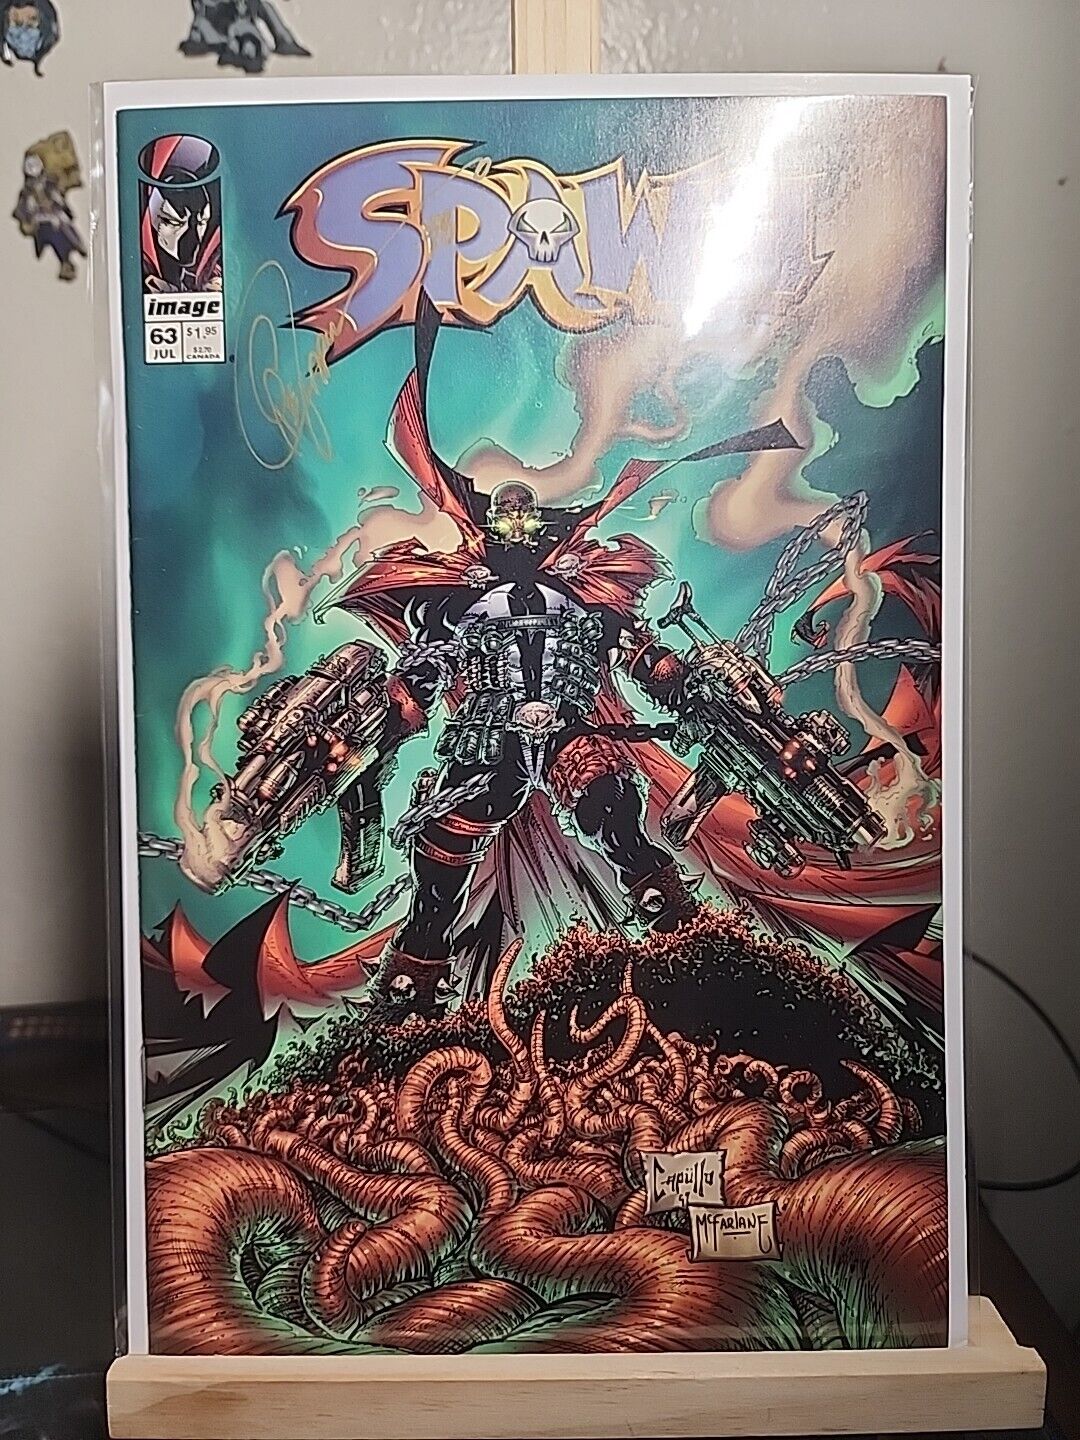 SPAWN 63 SIGNED BY GREG CAPULLO.  1997 .